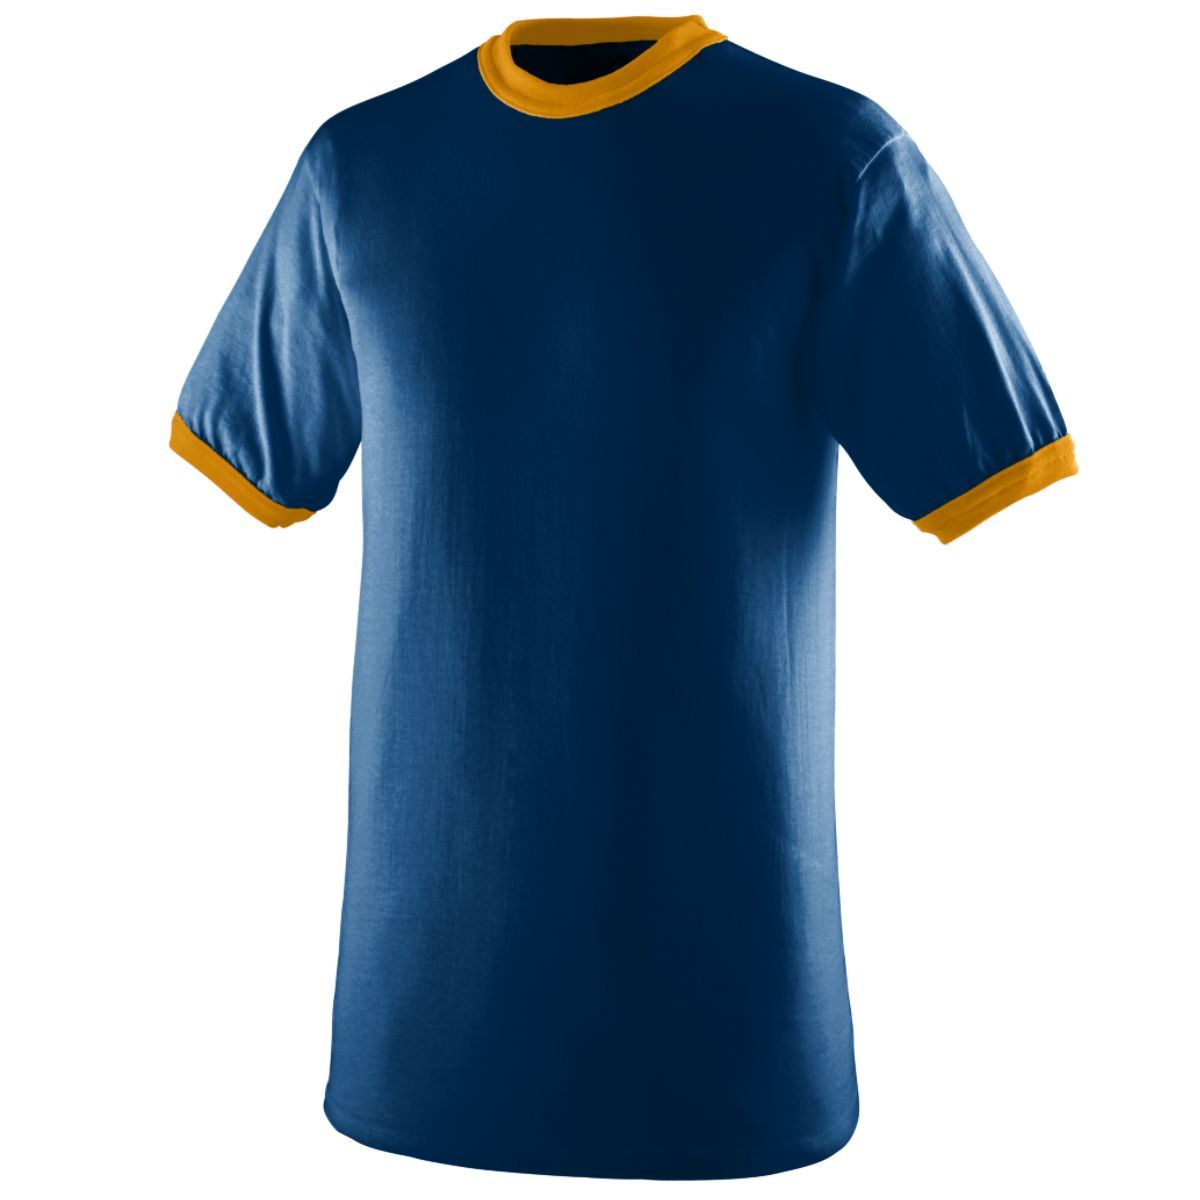 Augusta Sportswear Youth-Ringer T-Shirt in Navy/Gold  -Part of the Youth, Youth-Tee-Shirt, T-Shirts, Augusta-Products, Soccer, Shirts, All-Sports-1 product lines at KanaleyCreations.com